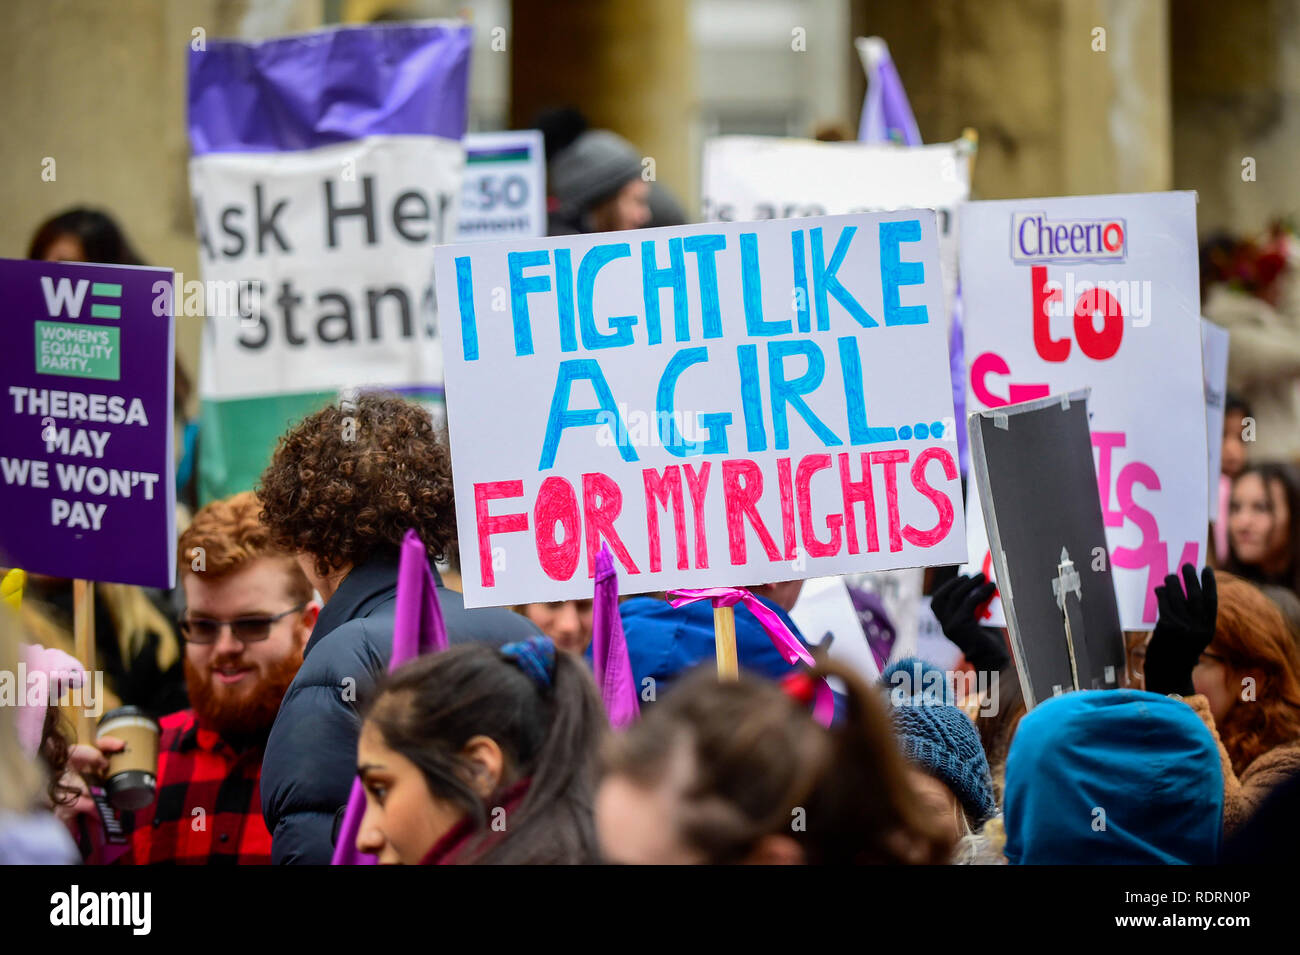 London, UK. 19th Jan, 2019. Signs held aloft during the Women's March in the capital, one of 30 such worldwide marches protesting against violence against women and the negative impact of austerity policies. London's theme this year is 'Bread and Roses', honouring Polish-American suffragette Rose Schneiderman who, in 1911 said 'The worker must have bread but she must have roses too', in response to a factory fire where 146 mainly female garment workers died. Credit: Stephen Chung/Alamy Live News Stock Photo